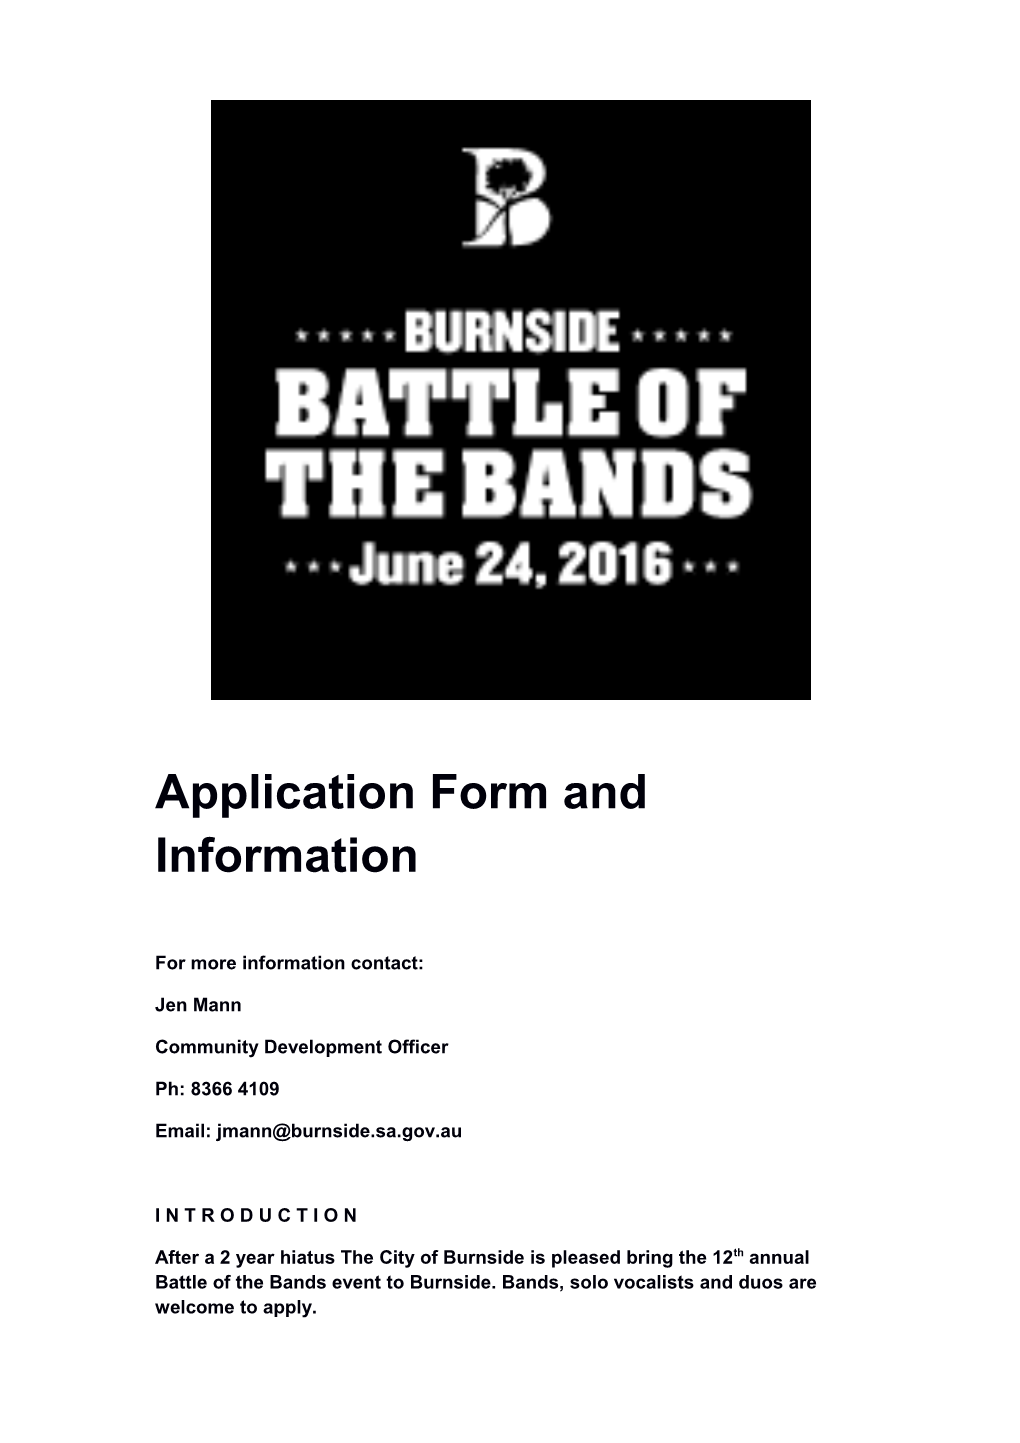 Application Form and Information